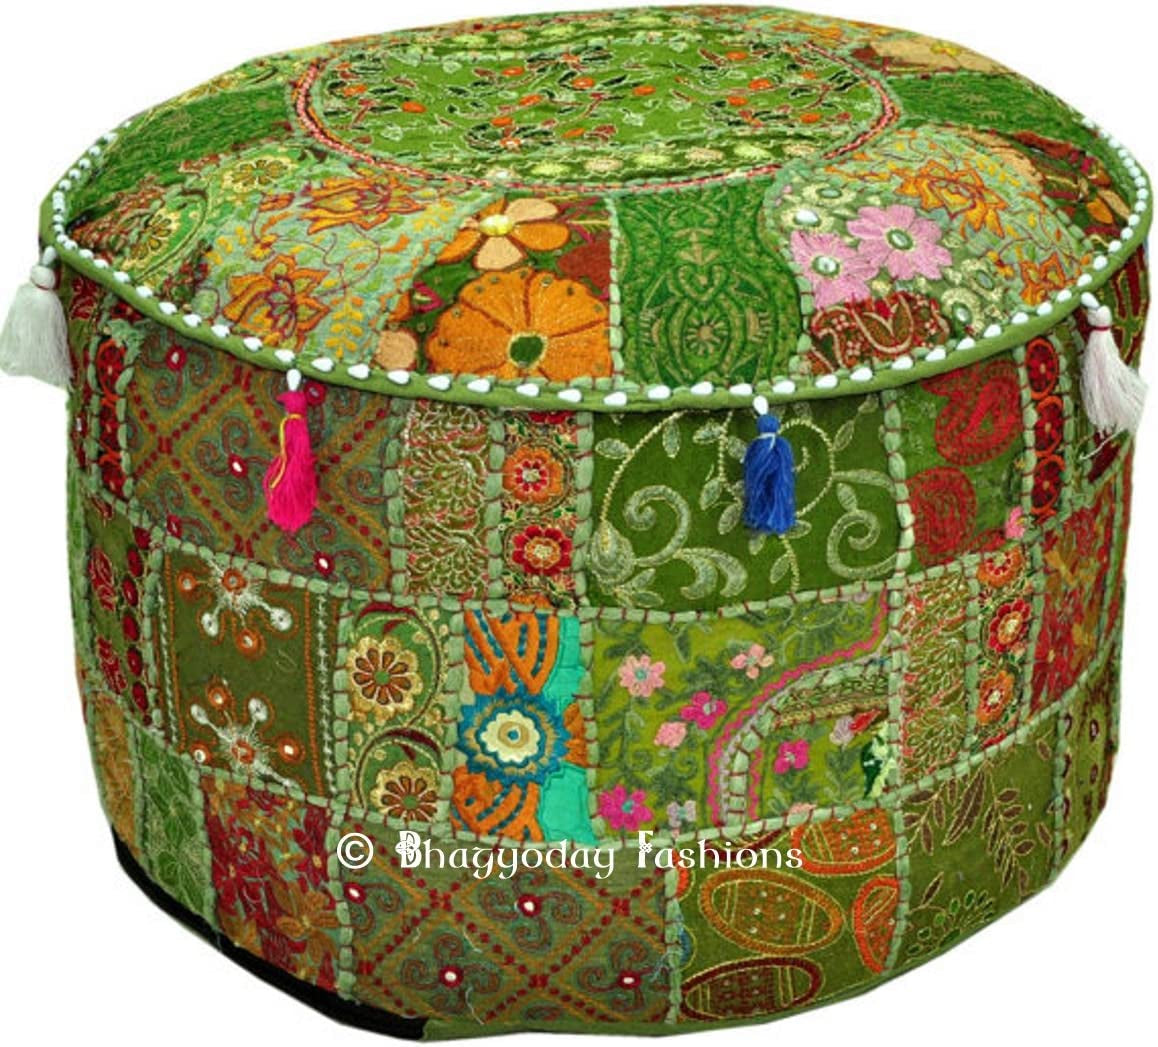 Bohemian Vintage Embroidered Pouf Ottoman Footstool Cover Indian round Ottoman Stool Pouf Pillow, Ethnic Embroidered Pouf Cover, Indian Cotton round Pouffe Ottoman Pouf Cover Pillow Ethnic Decor Art, 14X22 Inch. by Bhagyoday